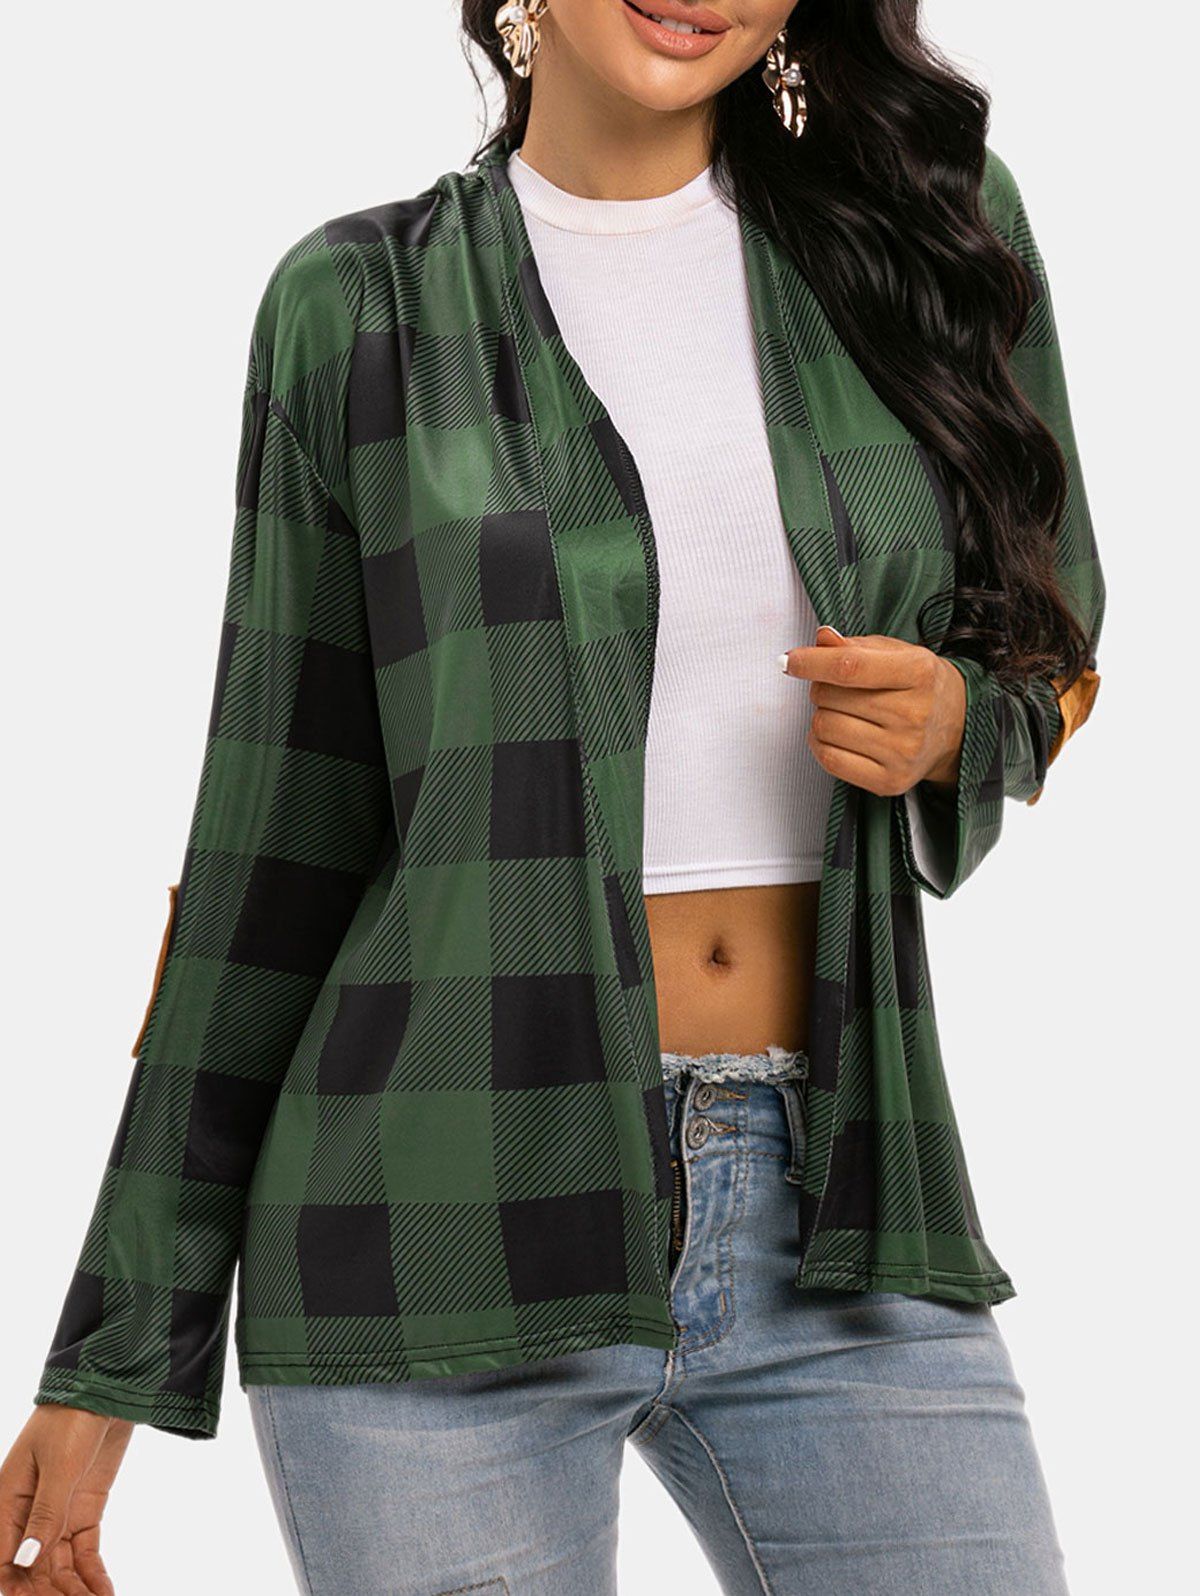 Plaid Elbow Patched Open Front Cardigan - GREEN M